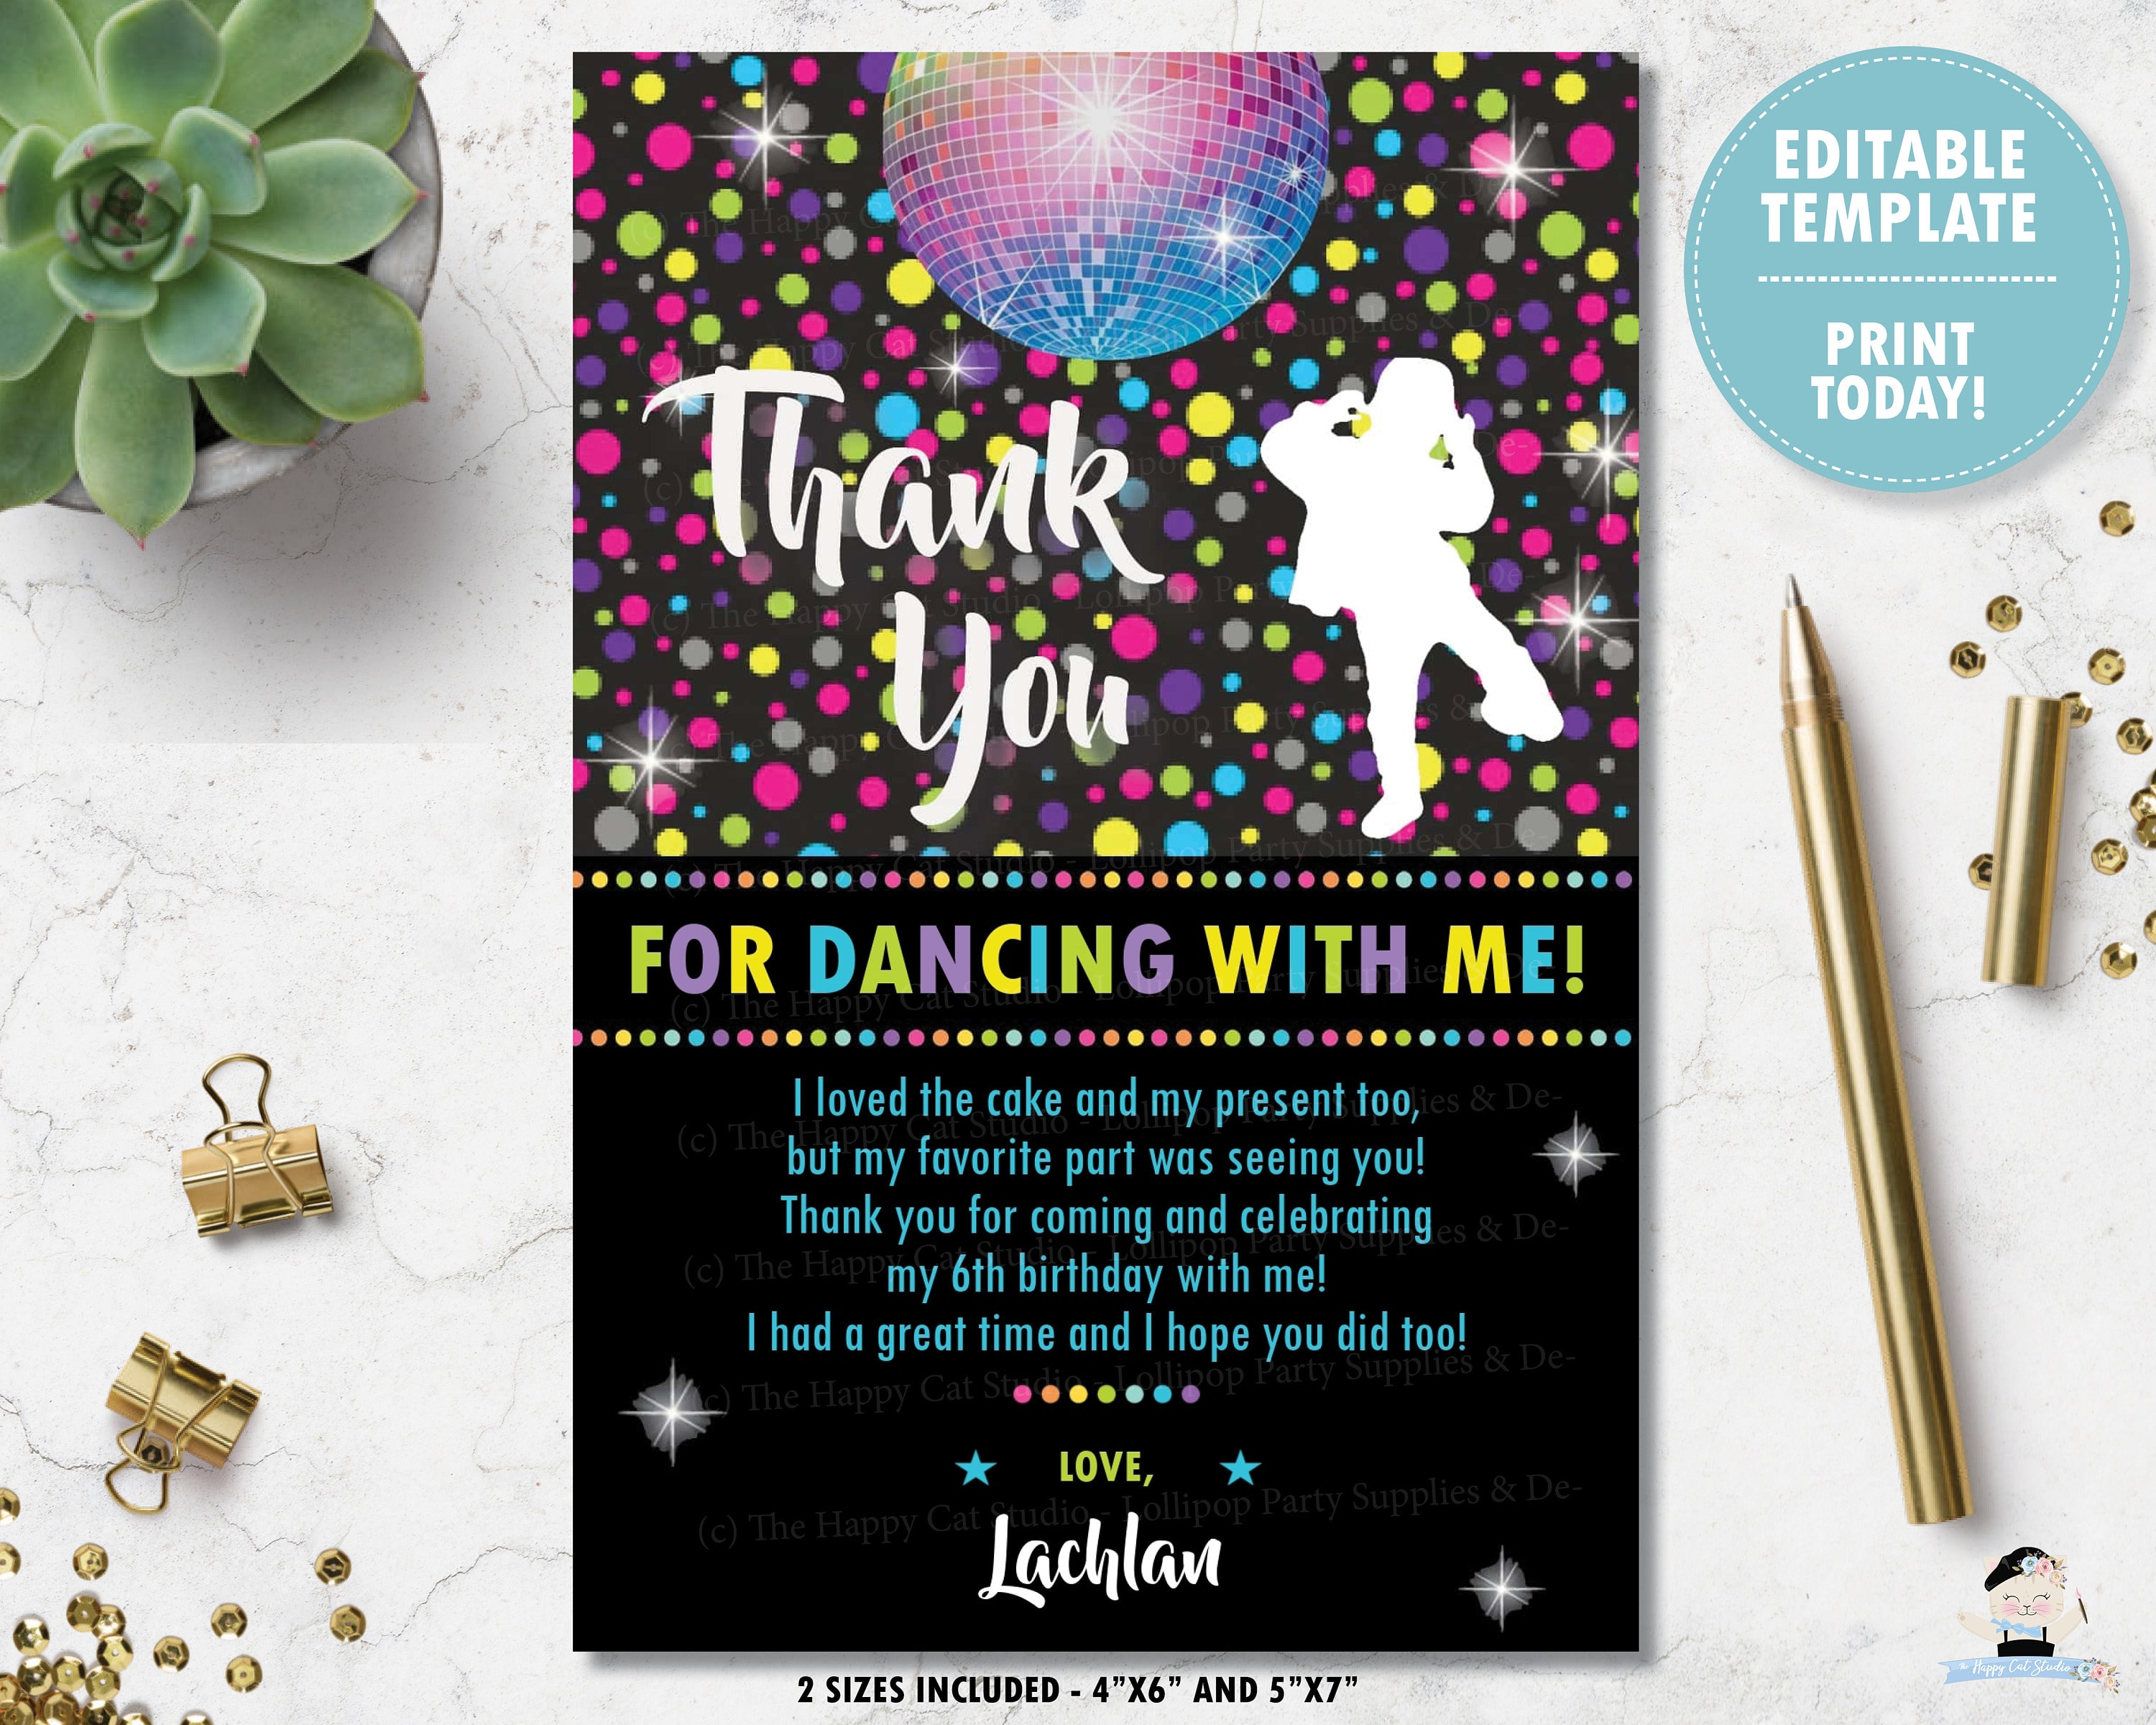 editable personalized stationery printable retro notecards disco thank you card template 70s theme bridal shower instant download